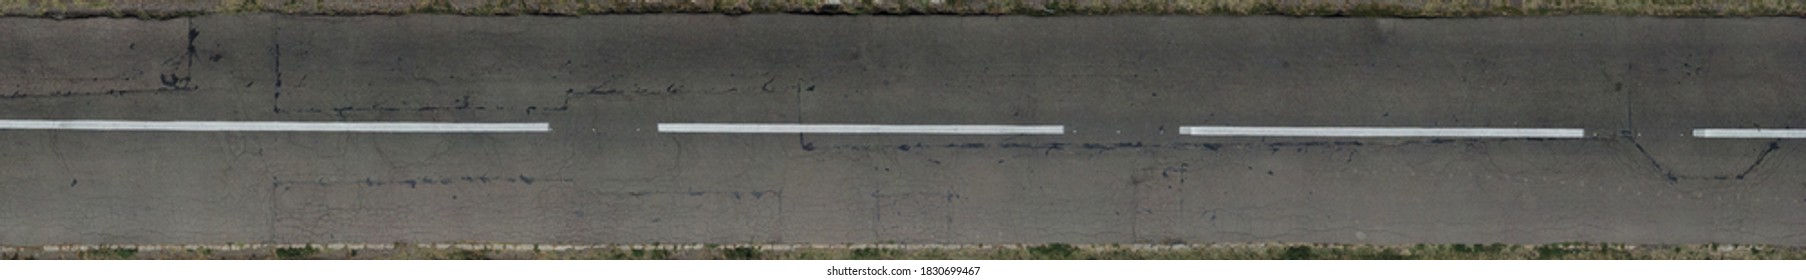 Old asphalt road aerial view - Powered by Shutterstock